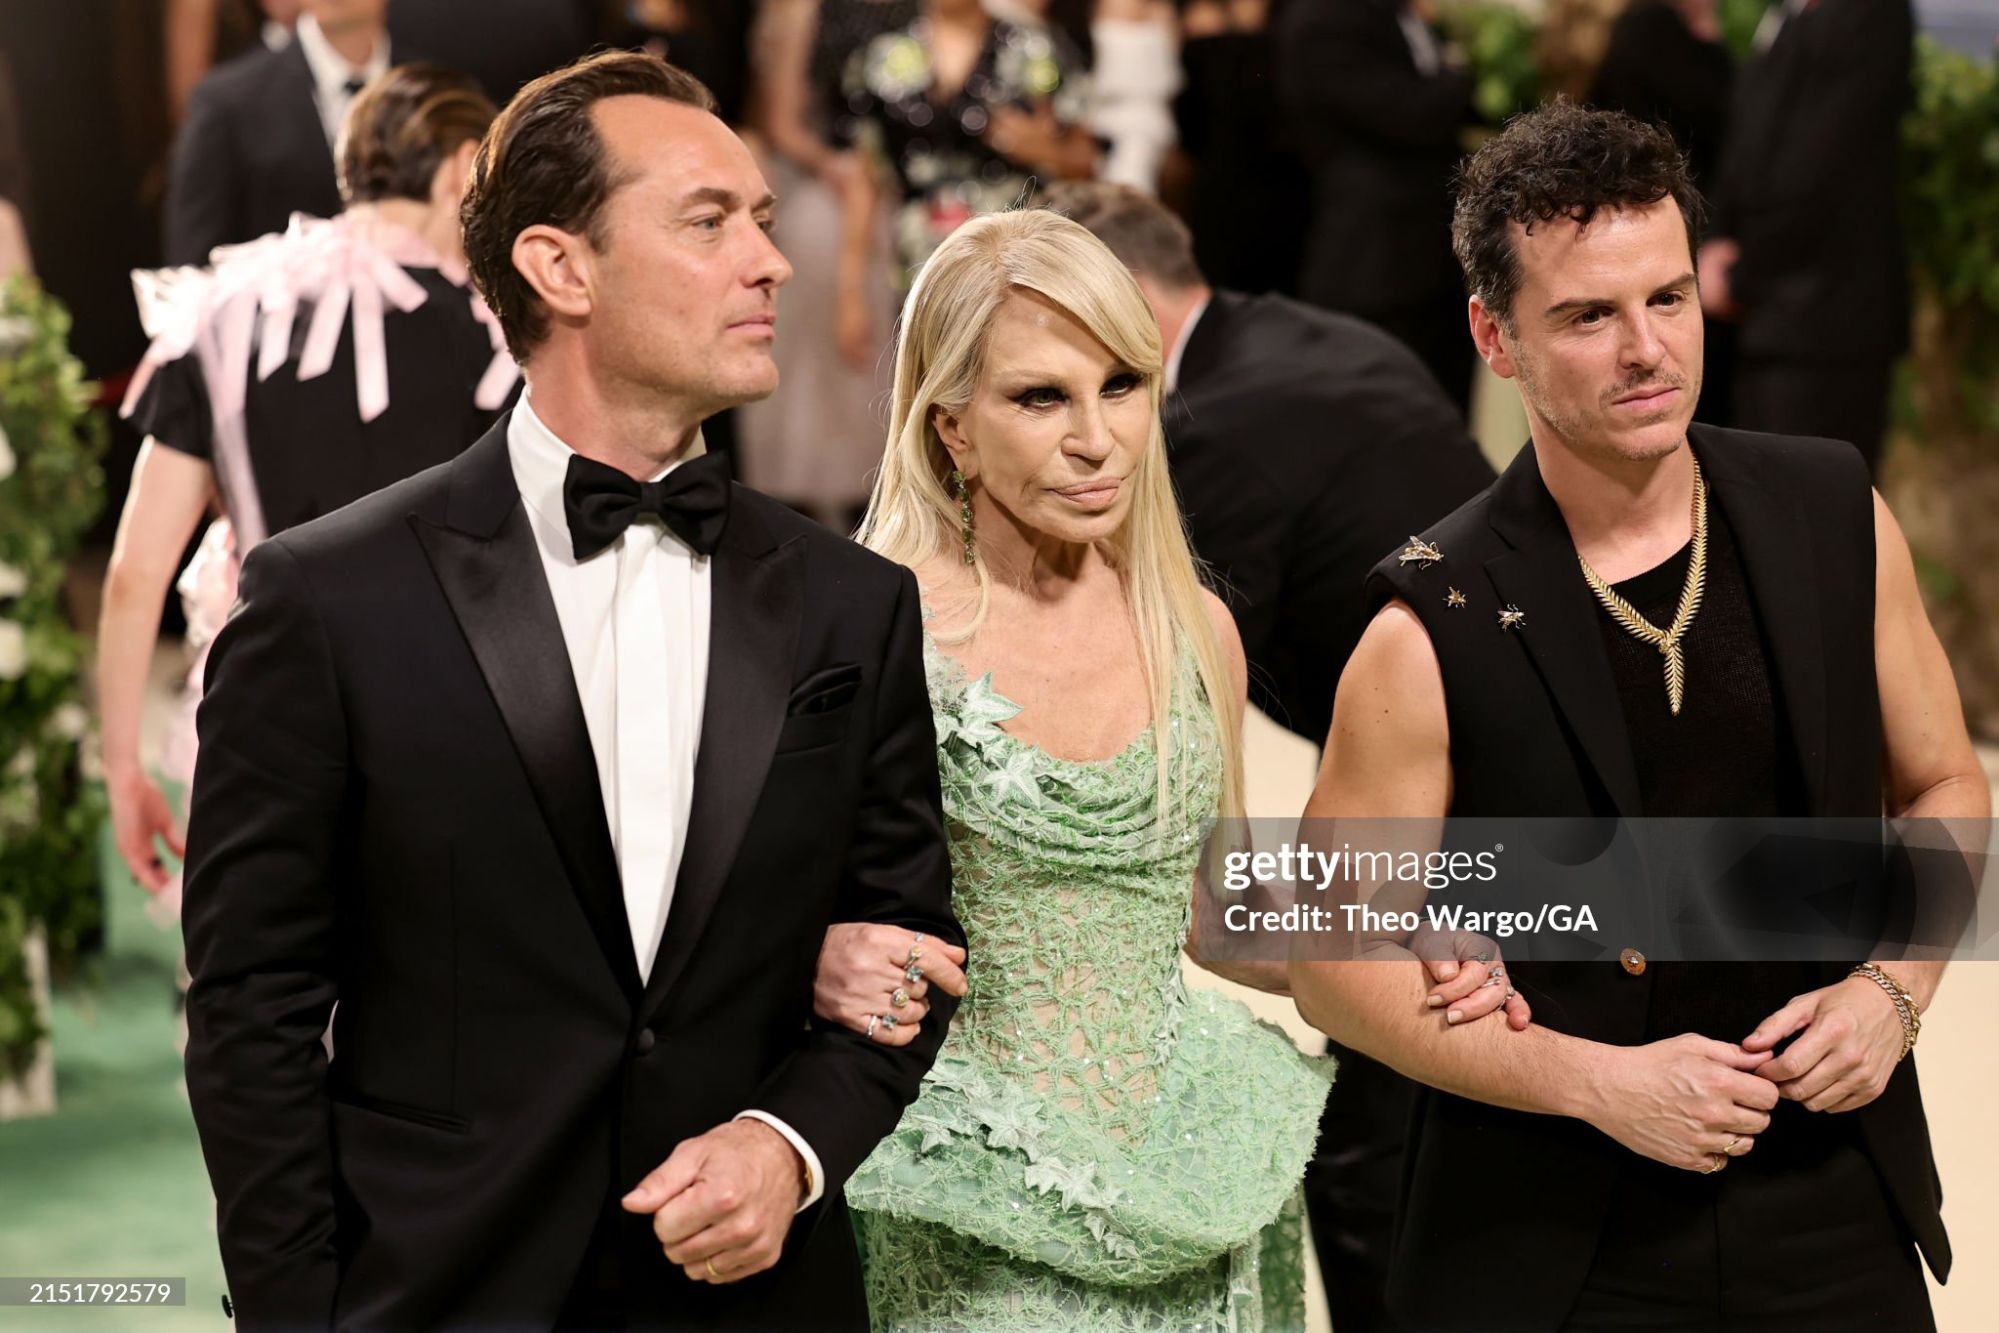 gettyimages-2151792579-2048x2048.jpg